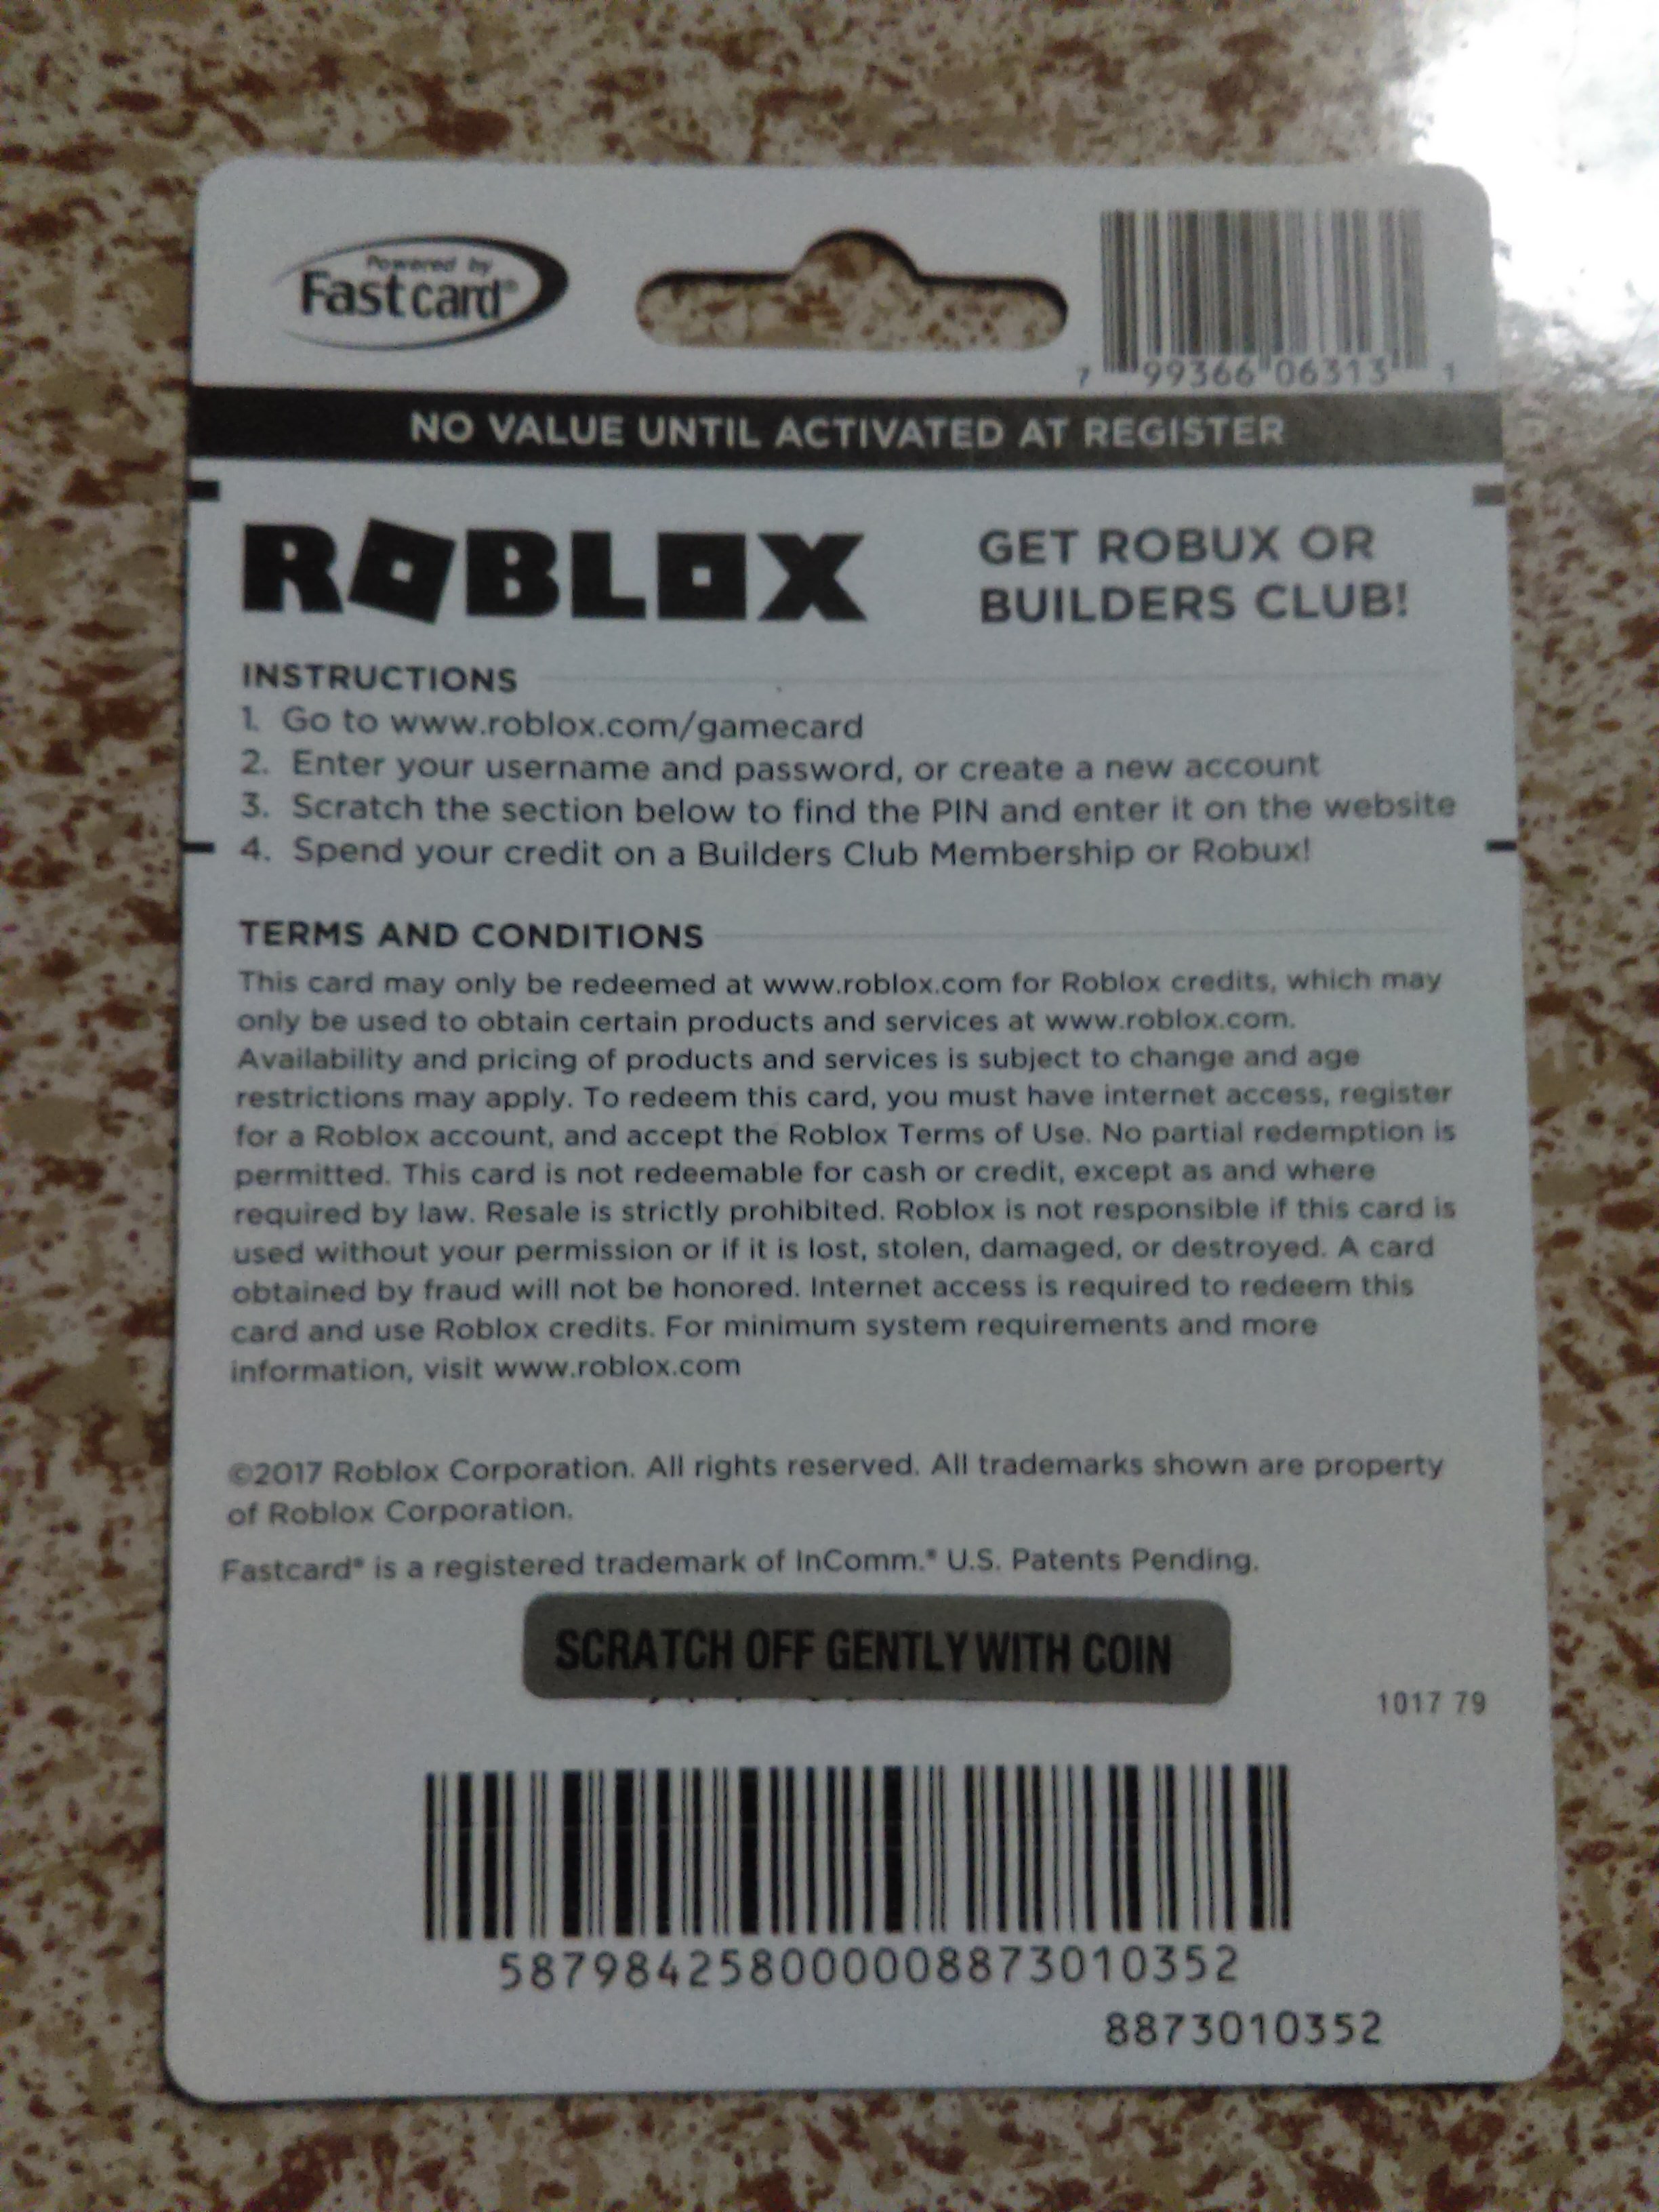 Are31 / Austin Tucker on X: [GIVEAWAY ENDS 3/9] If we get 100 retweets on  this tweet we'll give away one of these roblox cards to one lucky follower  who retweets this